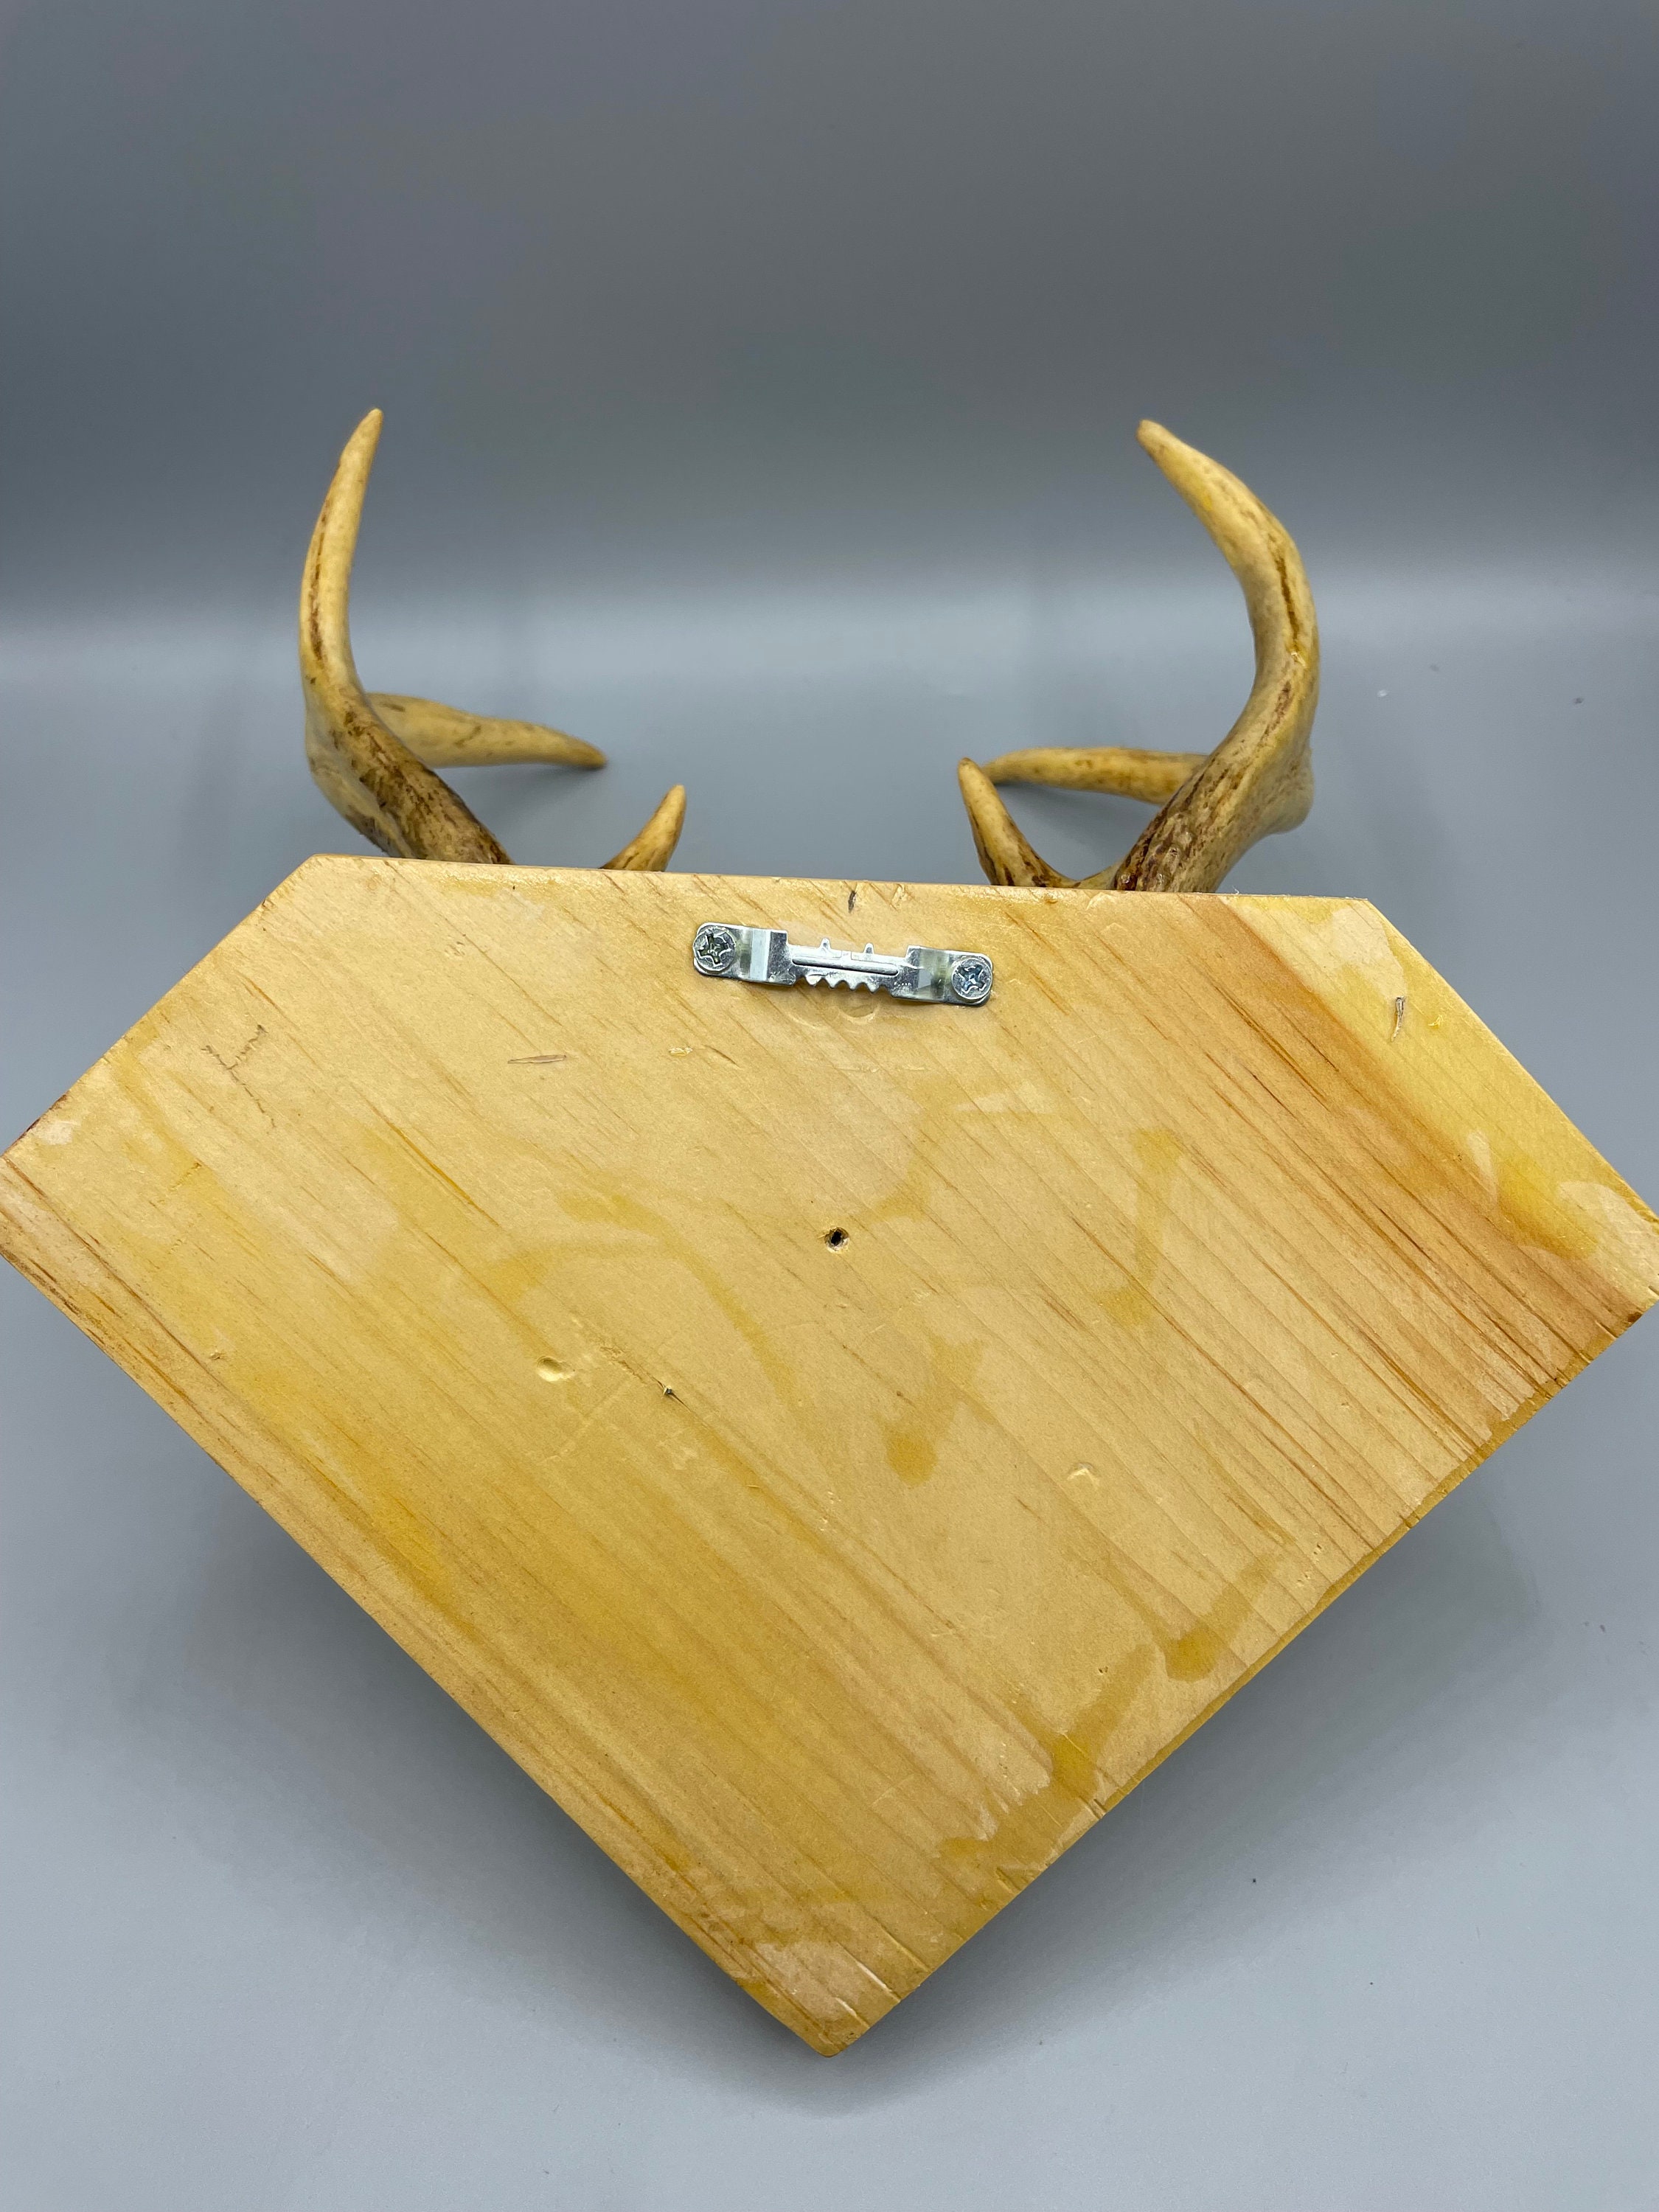 Florida Deer Small Antler Taxidermy with felt back